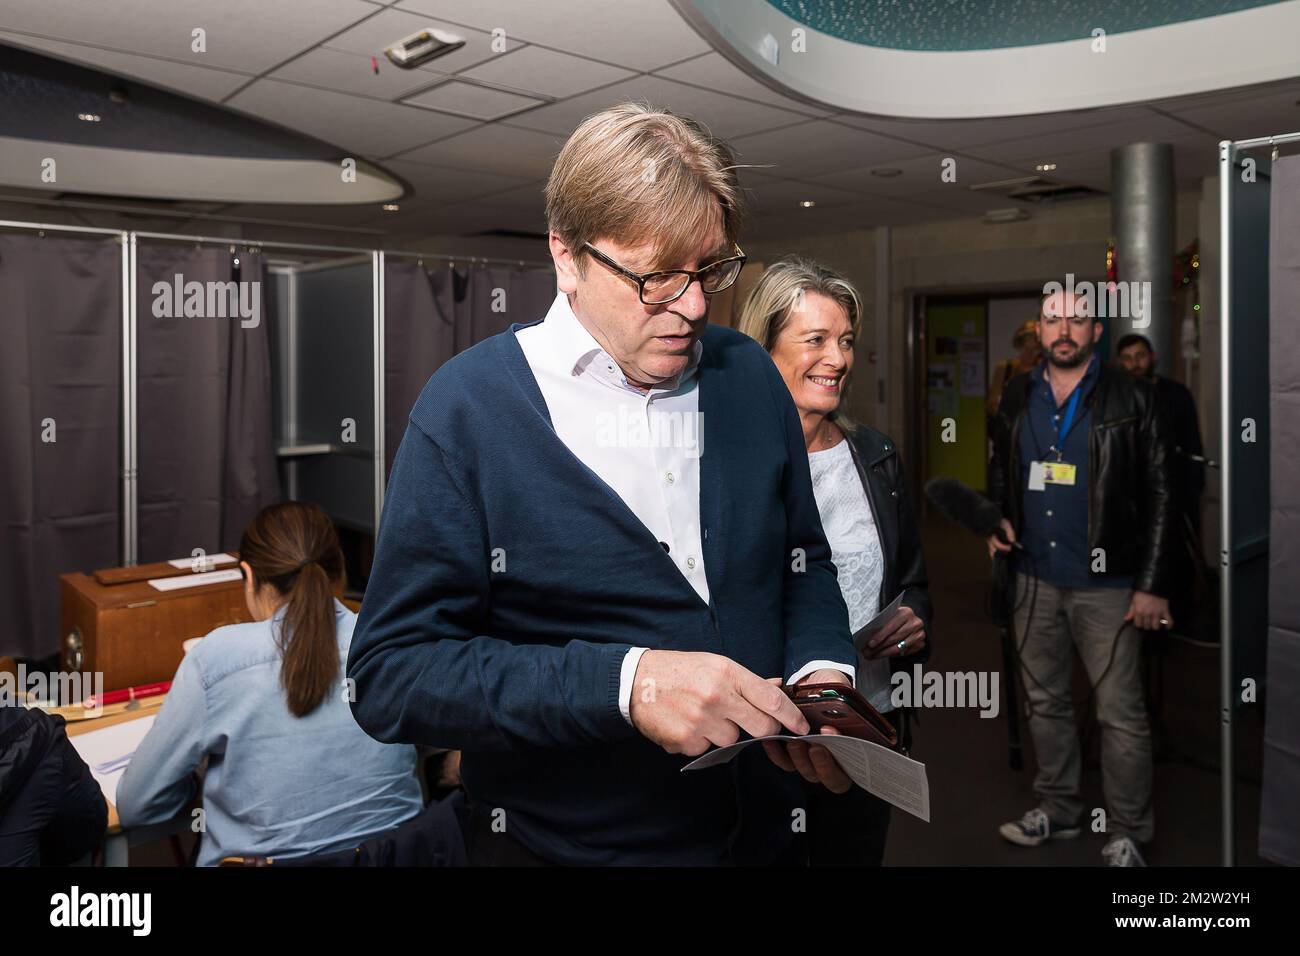 European parliament member for Open Vld Guy Verhofstadt and his wife Dominique Verkinderen pictured at a polling station in Mariakerke, Gent, Sunday 26 May 2019. Belgium holds regional, federal and European elections on Sunday. BELGA PHOTO JAMES ARTHUR GEKIERE Stock Photo